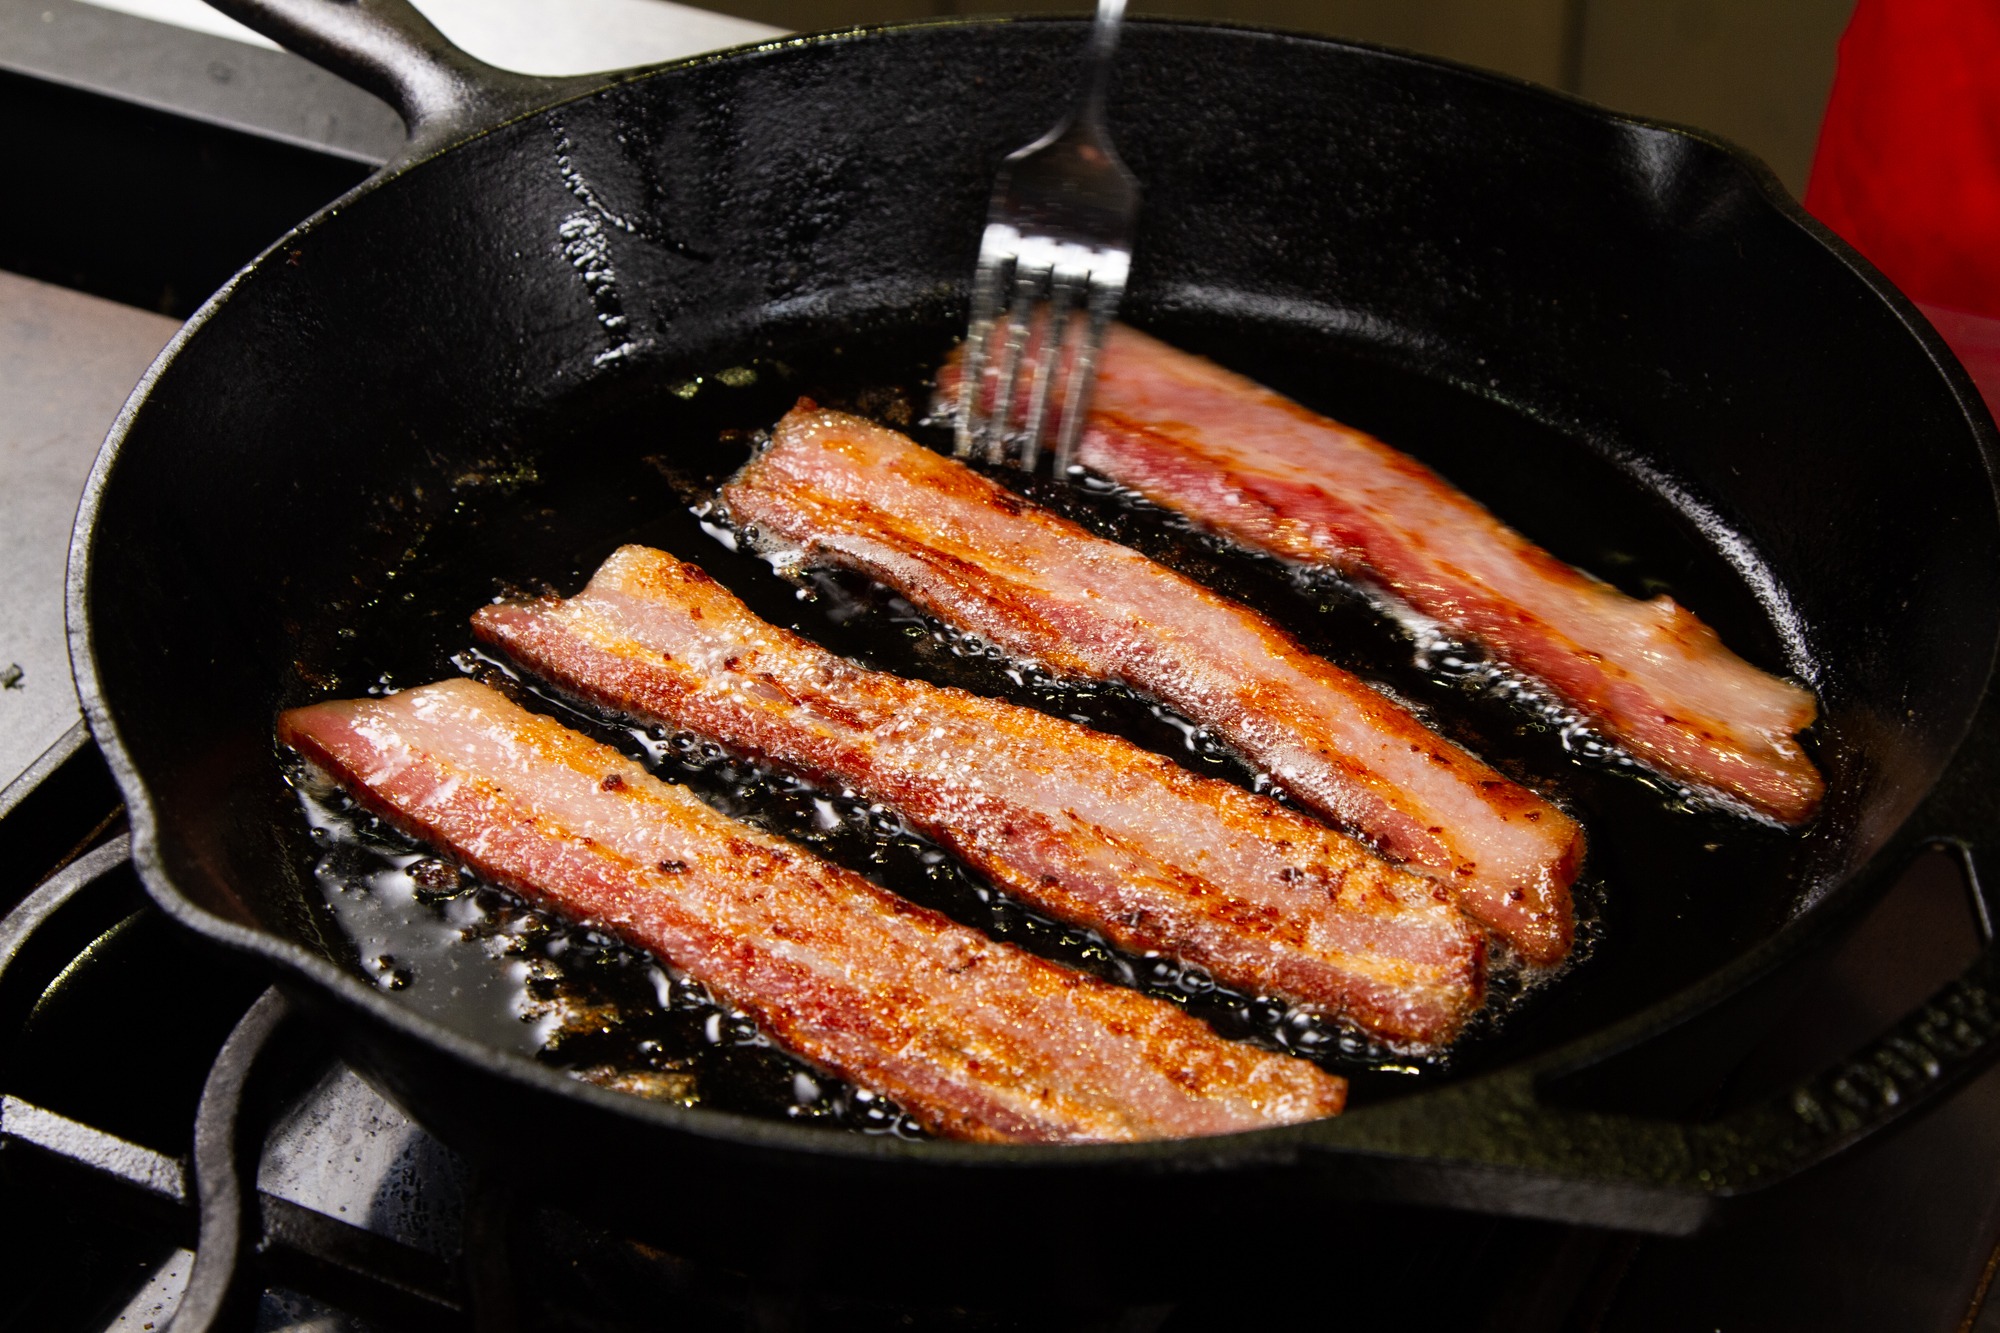 https://blog.thermoworks.com/wp-content/uploads/2019/04/Curing-Bacon-IMG_3089102-of-153.jpg